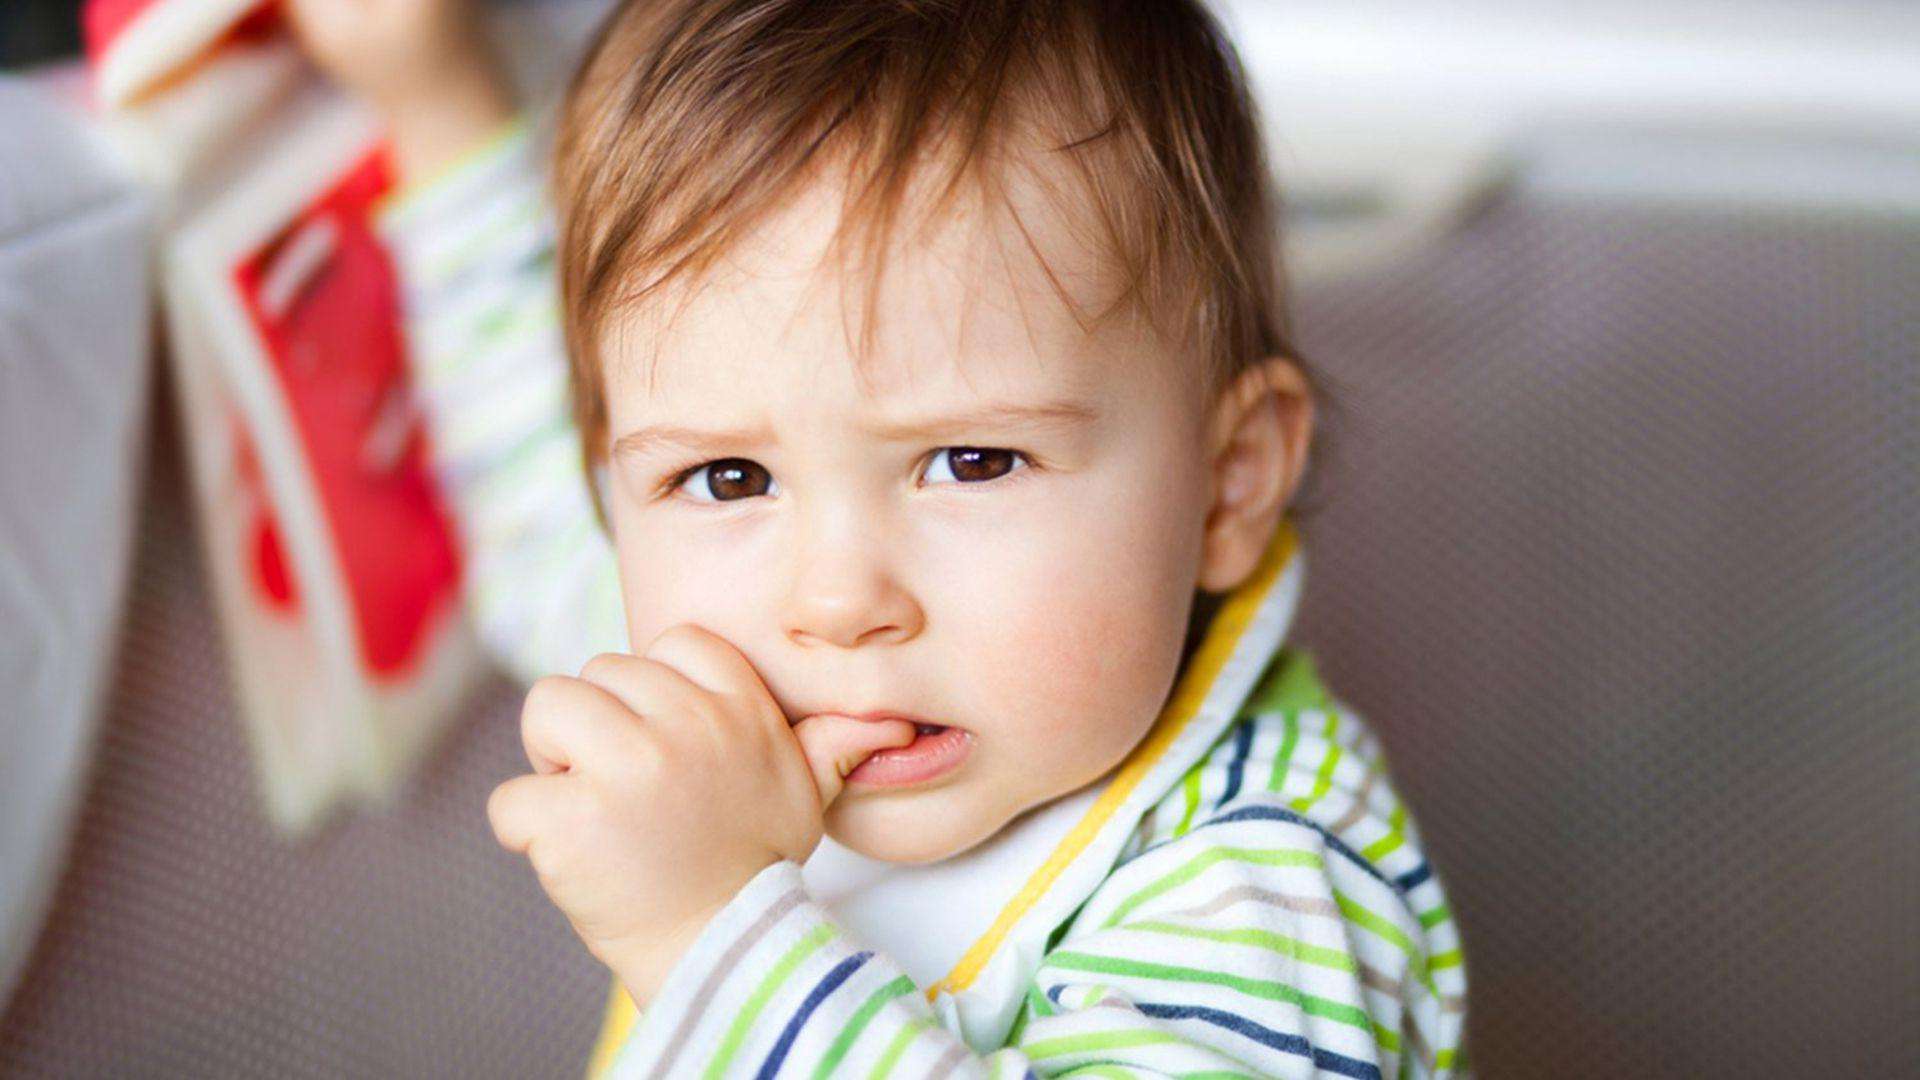 My Toddler Biting His Nails, What to Do?